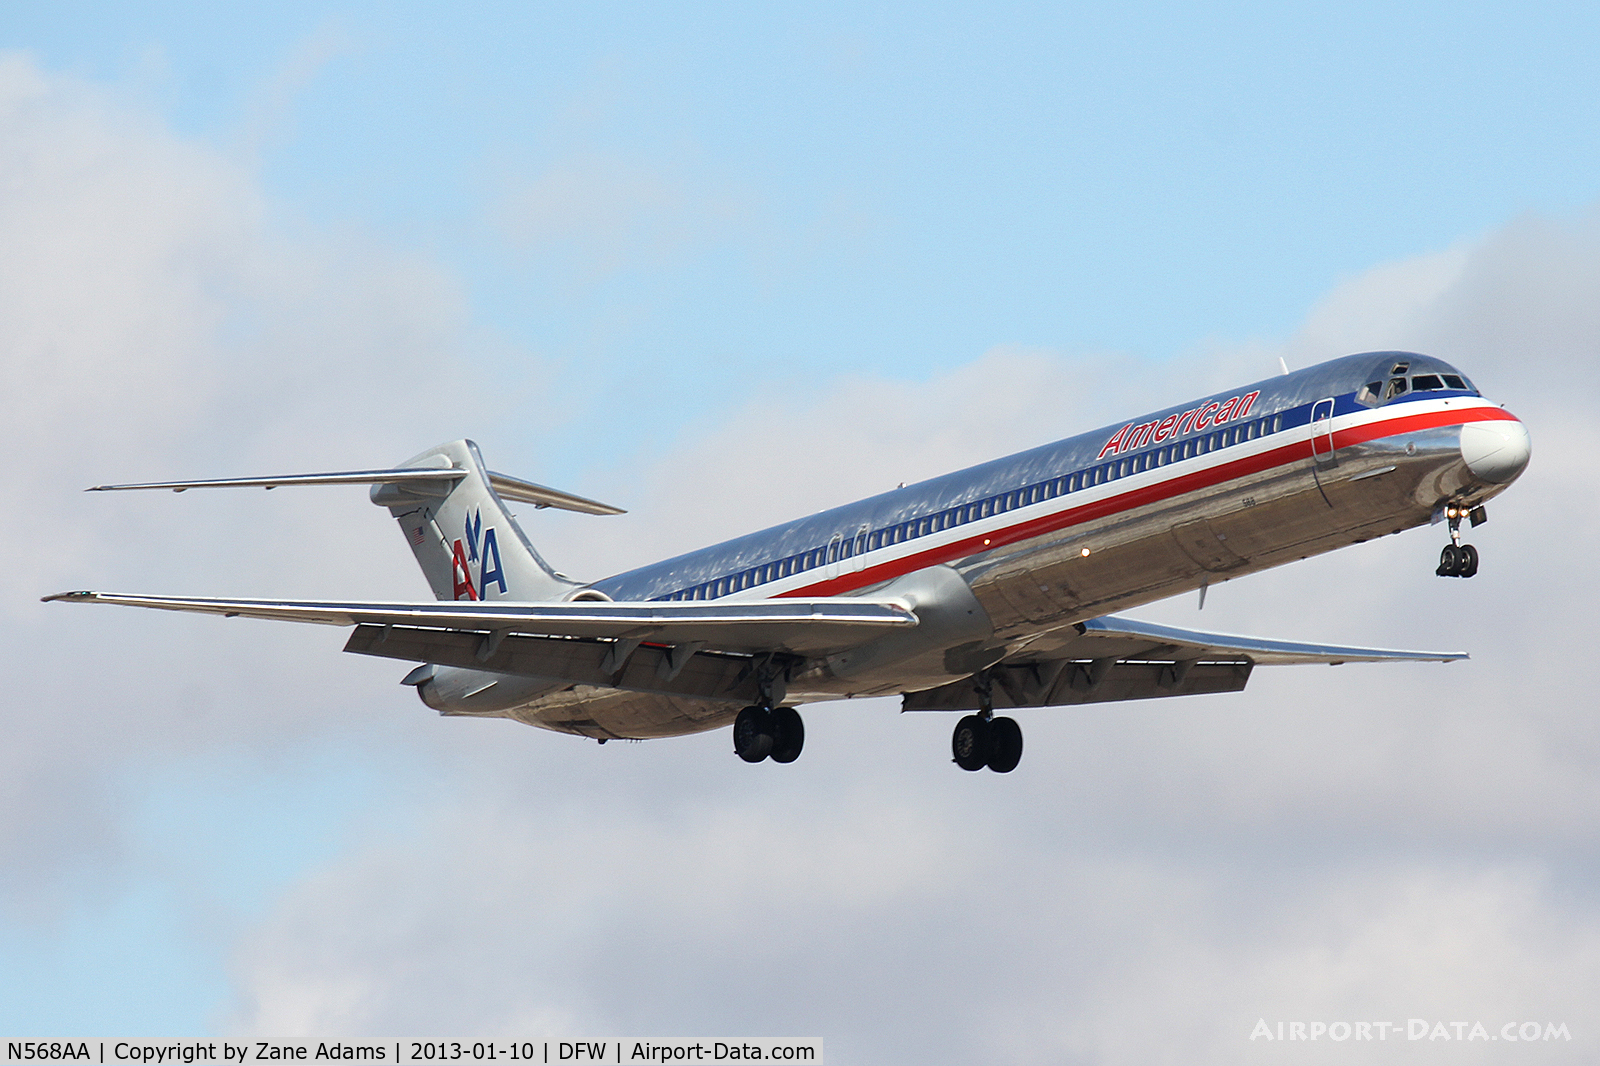 N568AA, 1987 McDonnell Douglas MD-83 (DC-9-83) C/N 49349, American Airlines landing at DFW Airport